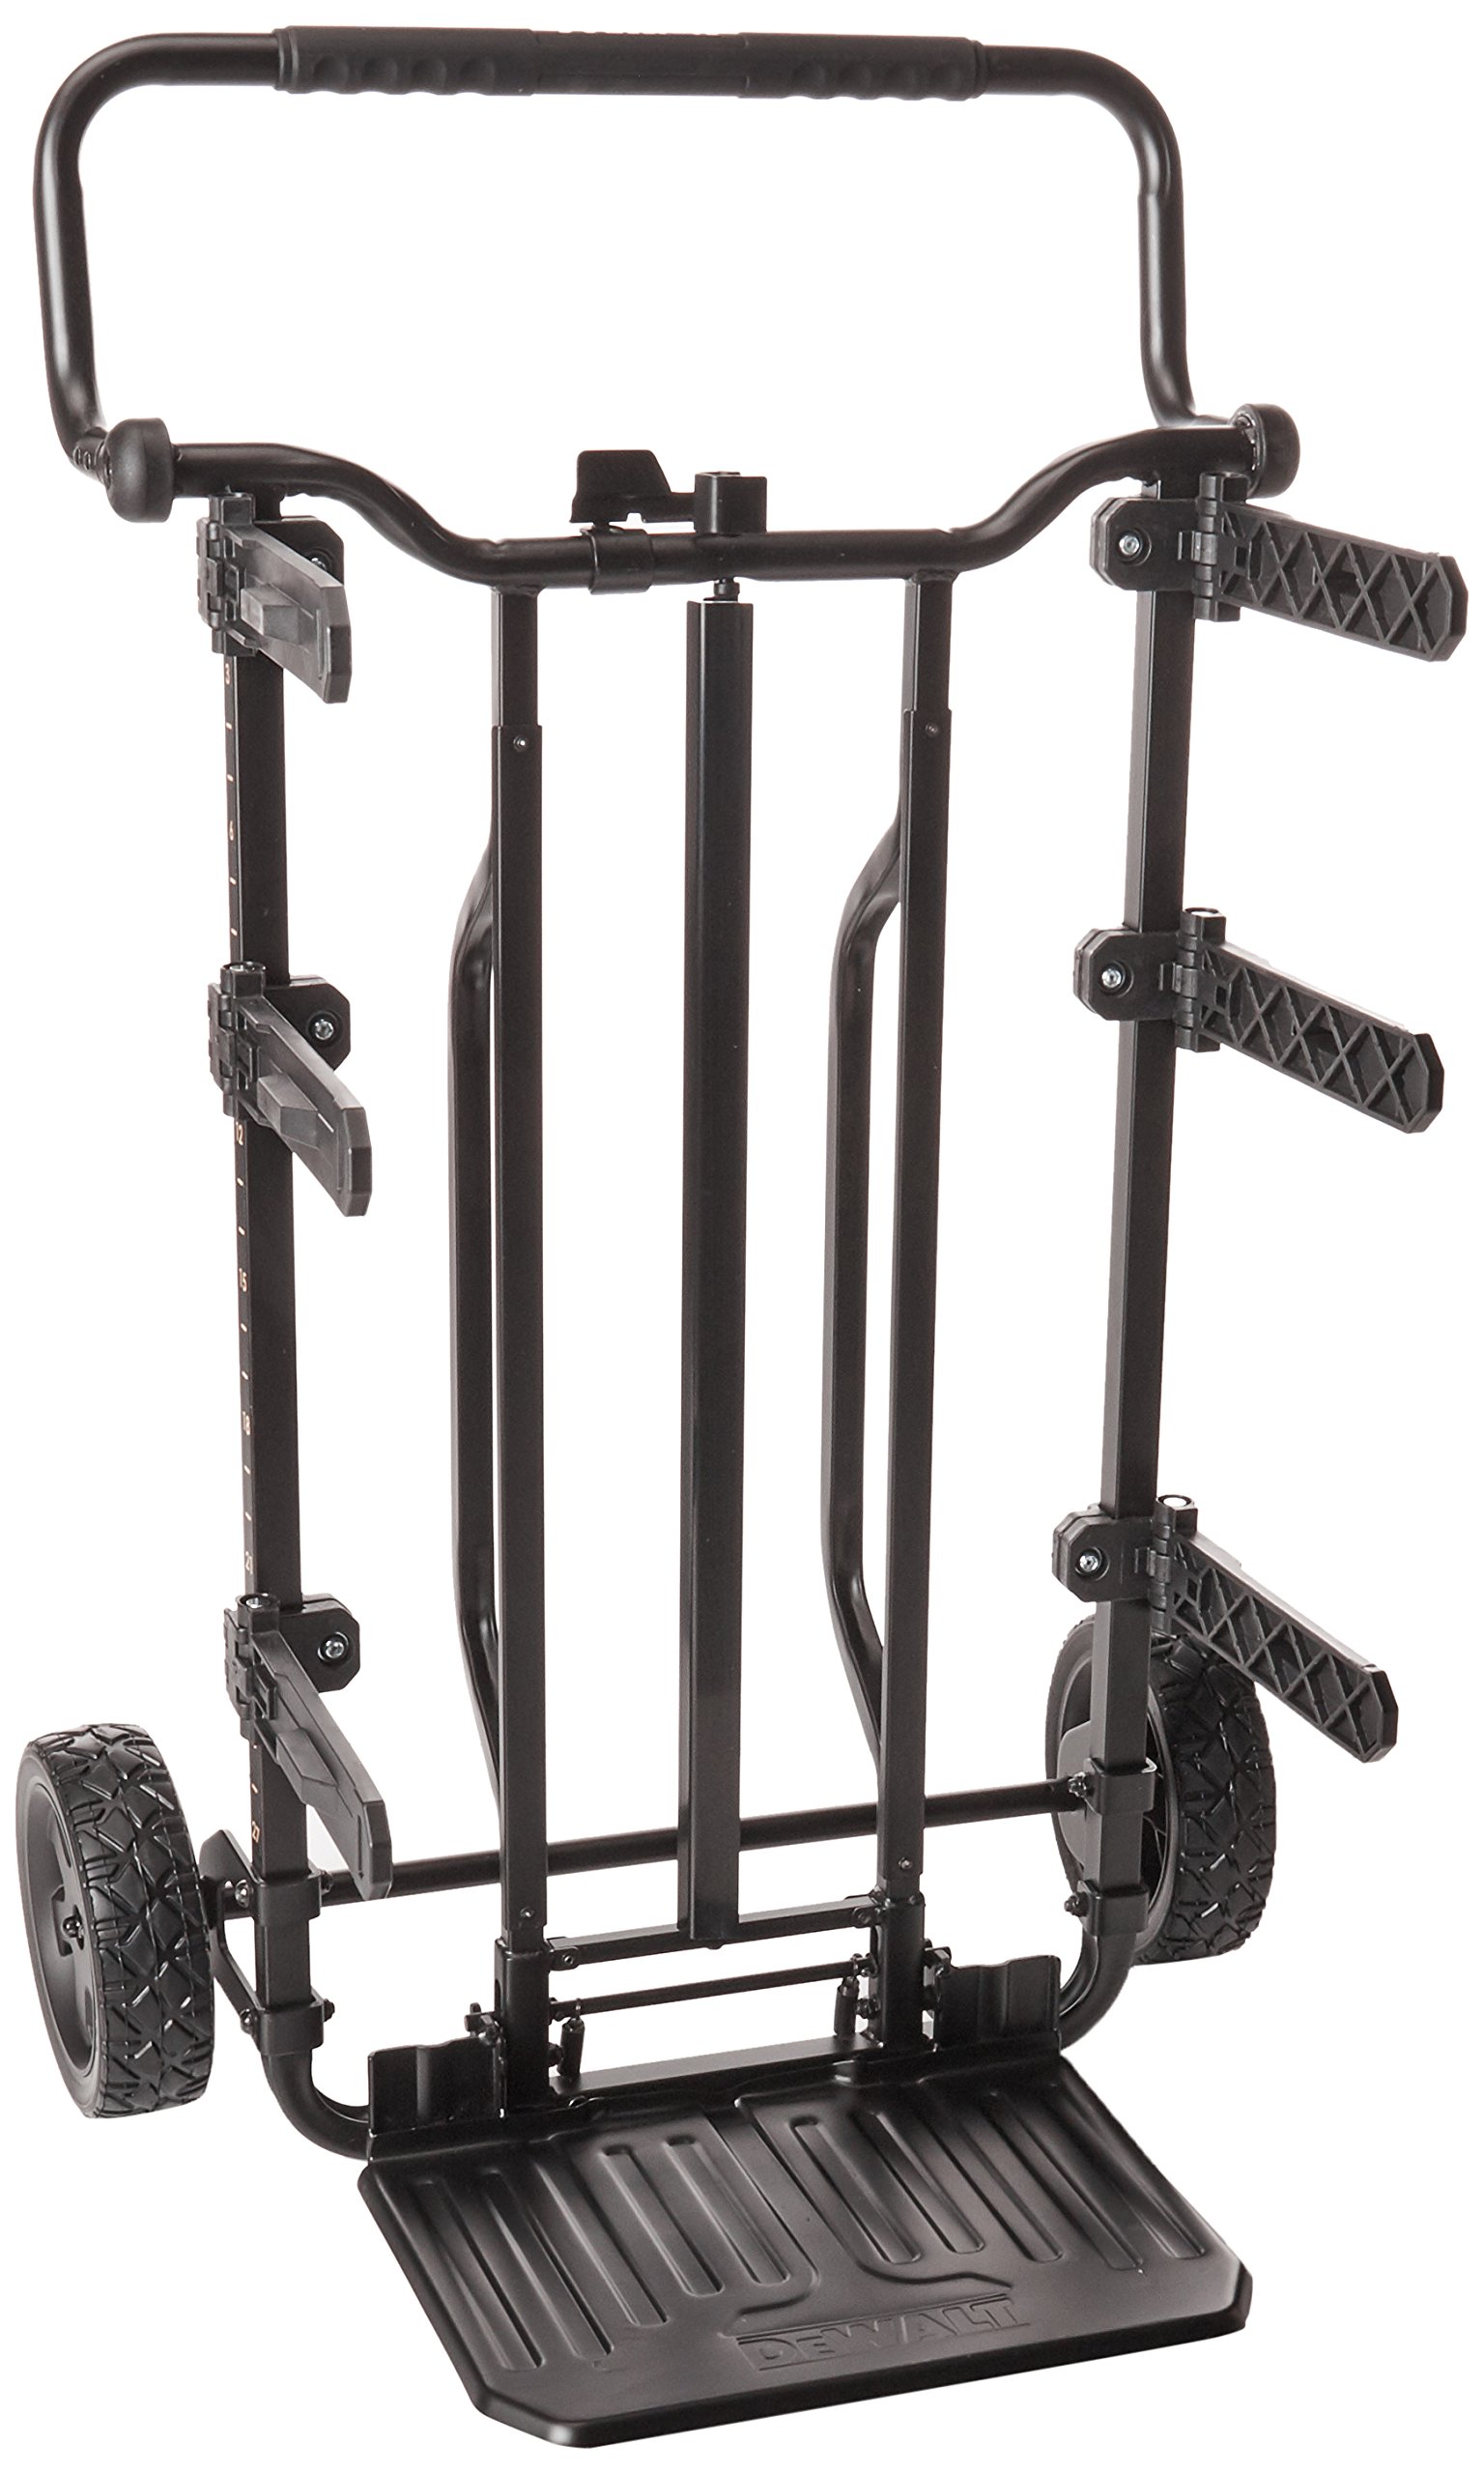 DEWALT Tough System Tool Cart, Holds Up To 160lbs, Foldable Brackets, Central Lock Mechanism, Heavy Duty Wheels for Easy Rolling(DWST08210) $117.99